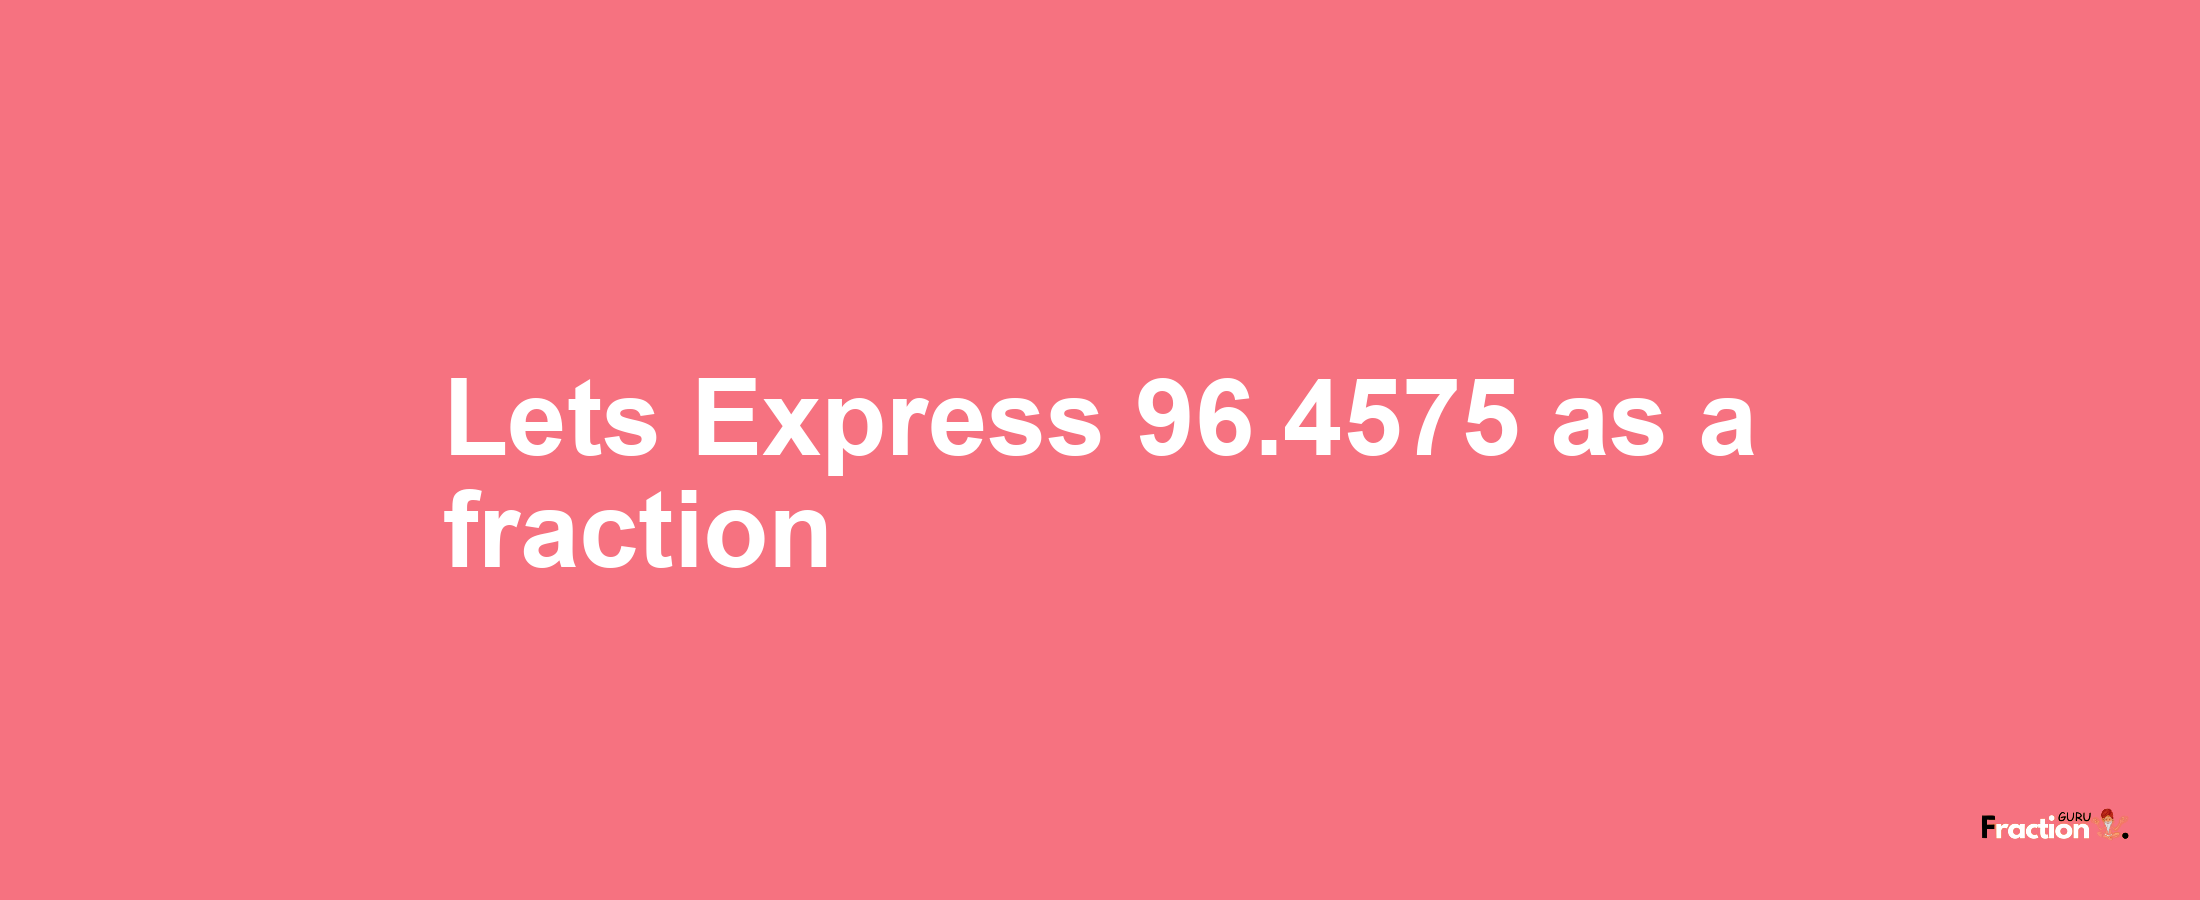 Lets Express 96.4575 as afraction